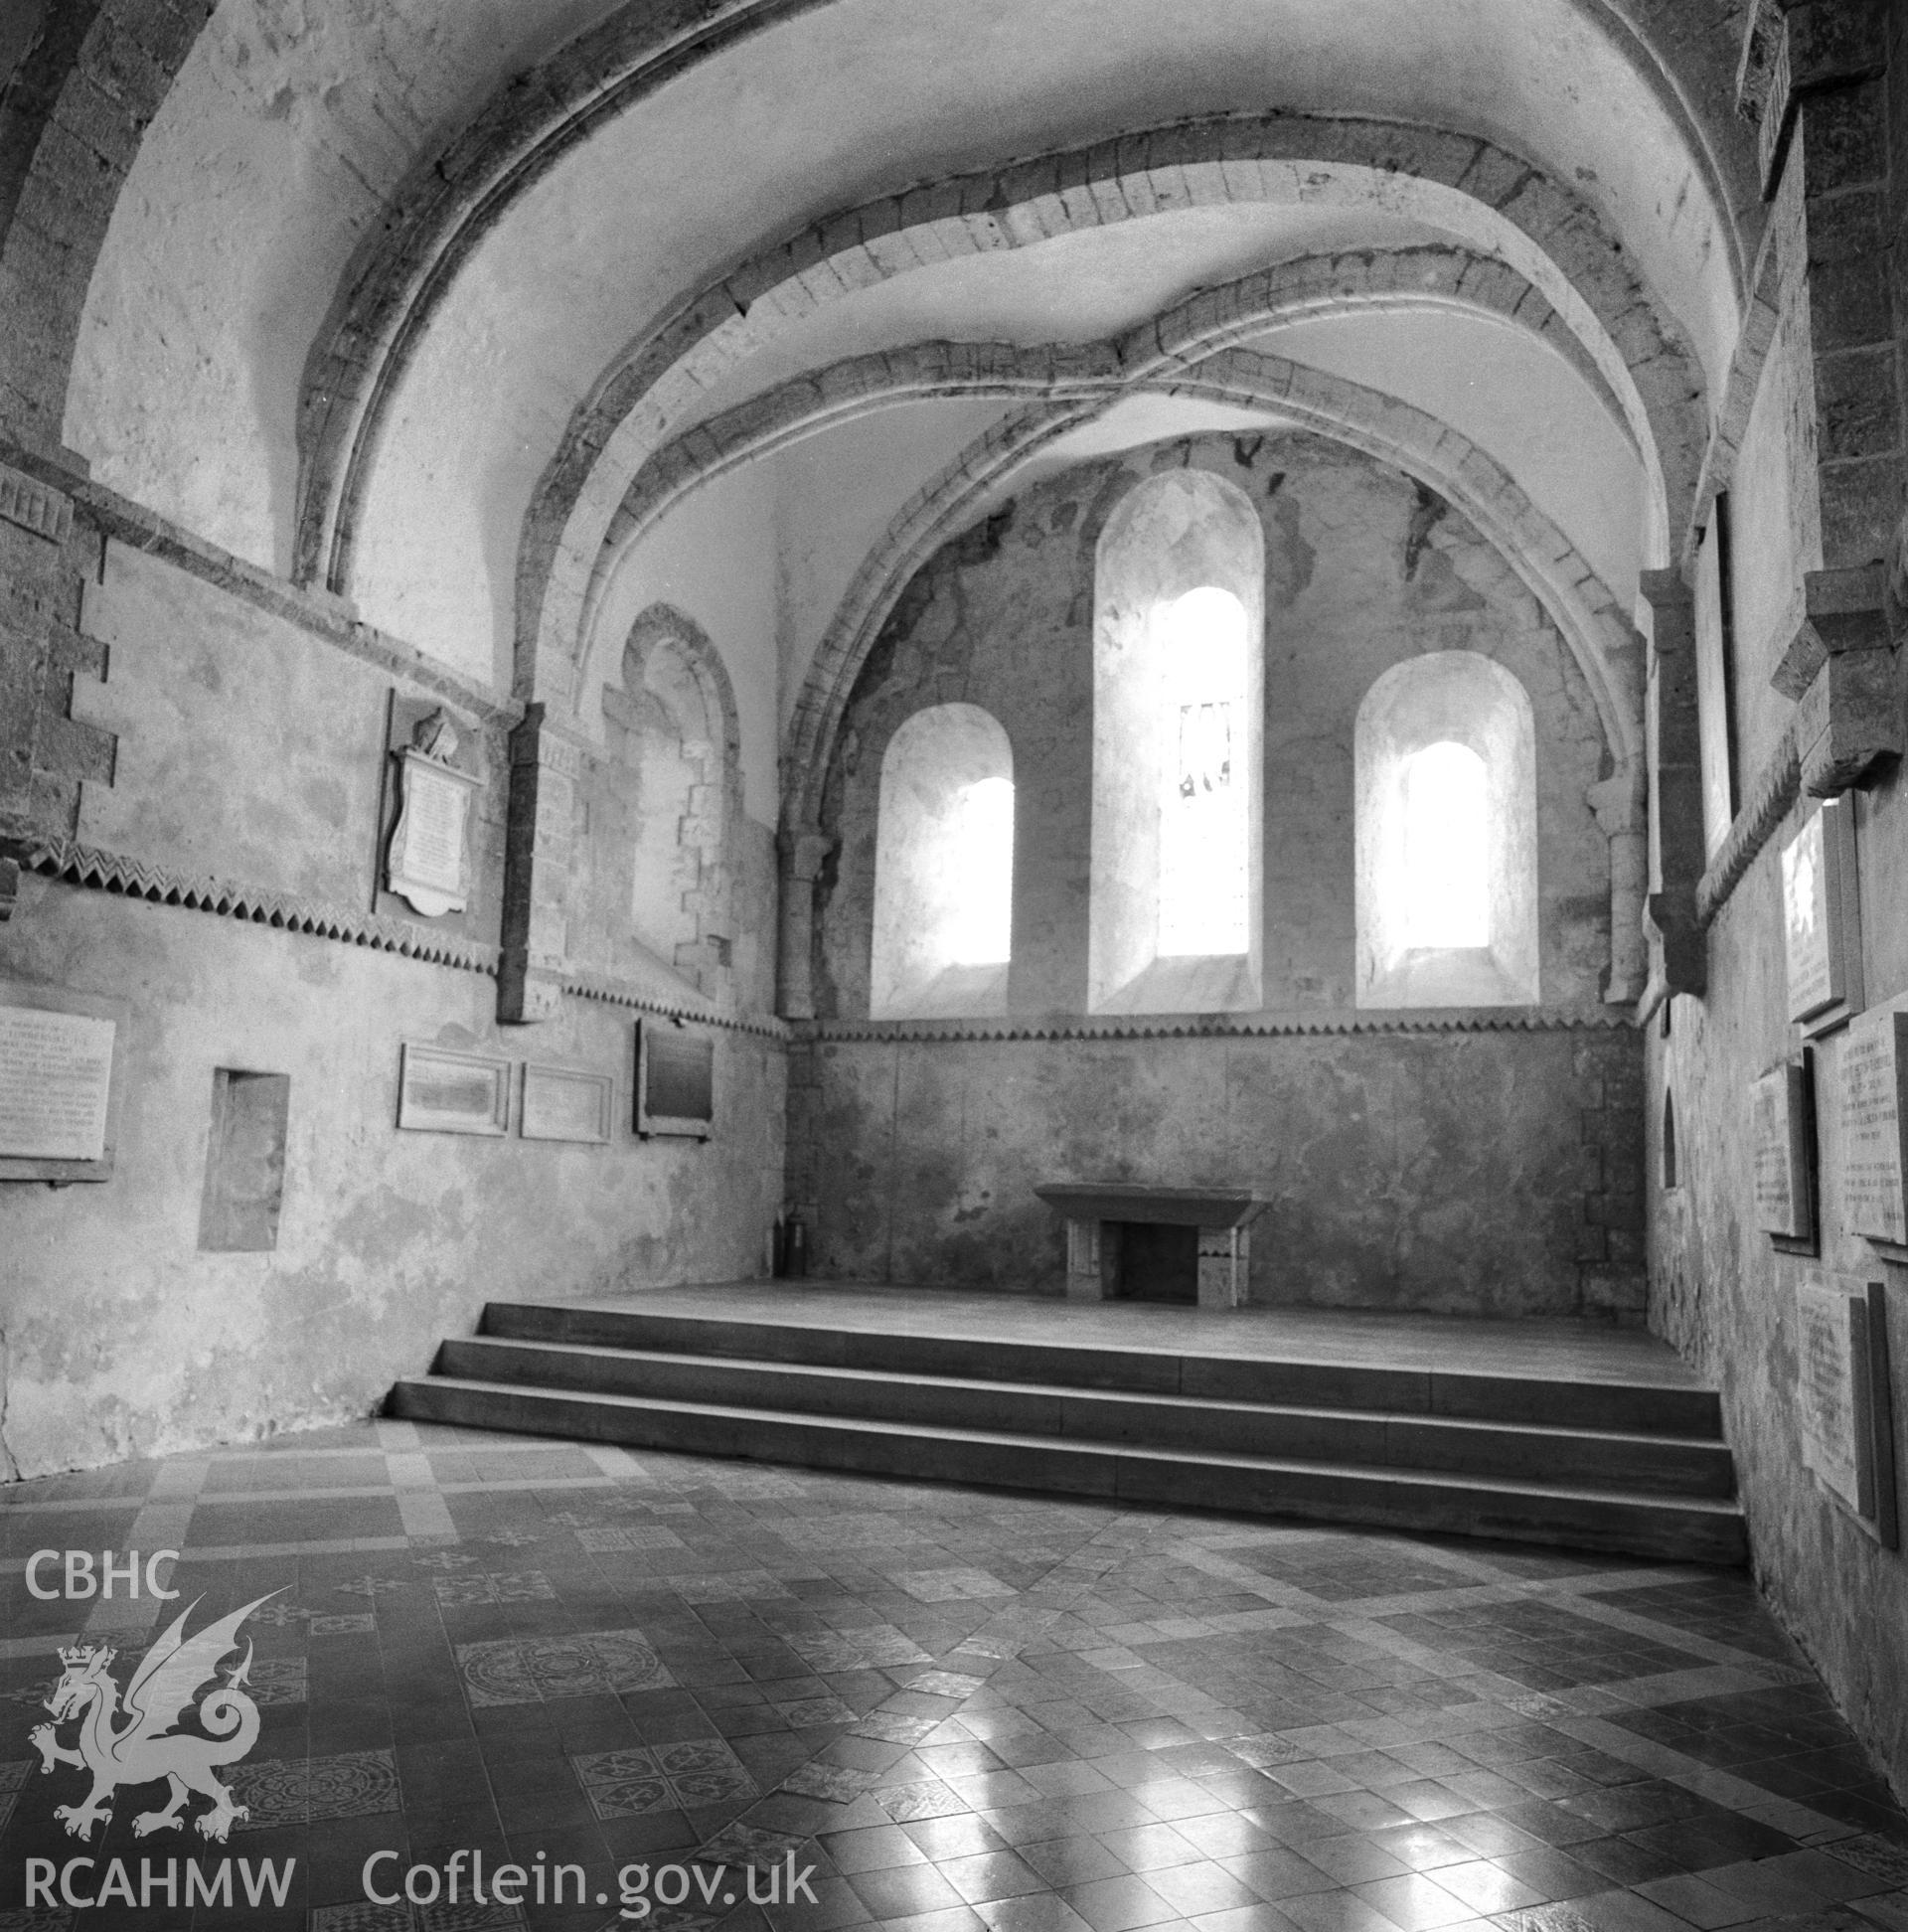 1 b/w print showing interior view of Ewenny Priory with tombstones; collated by the former Central Office of Information.